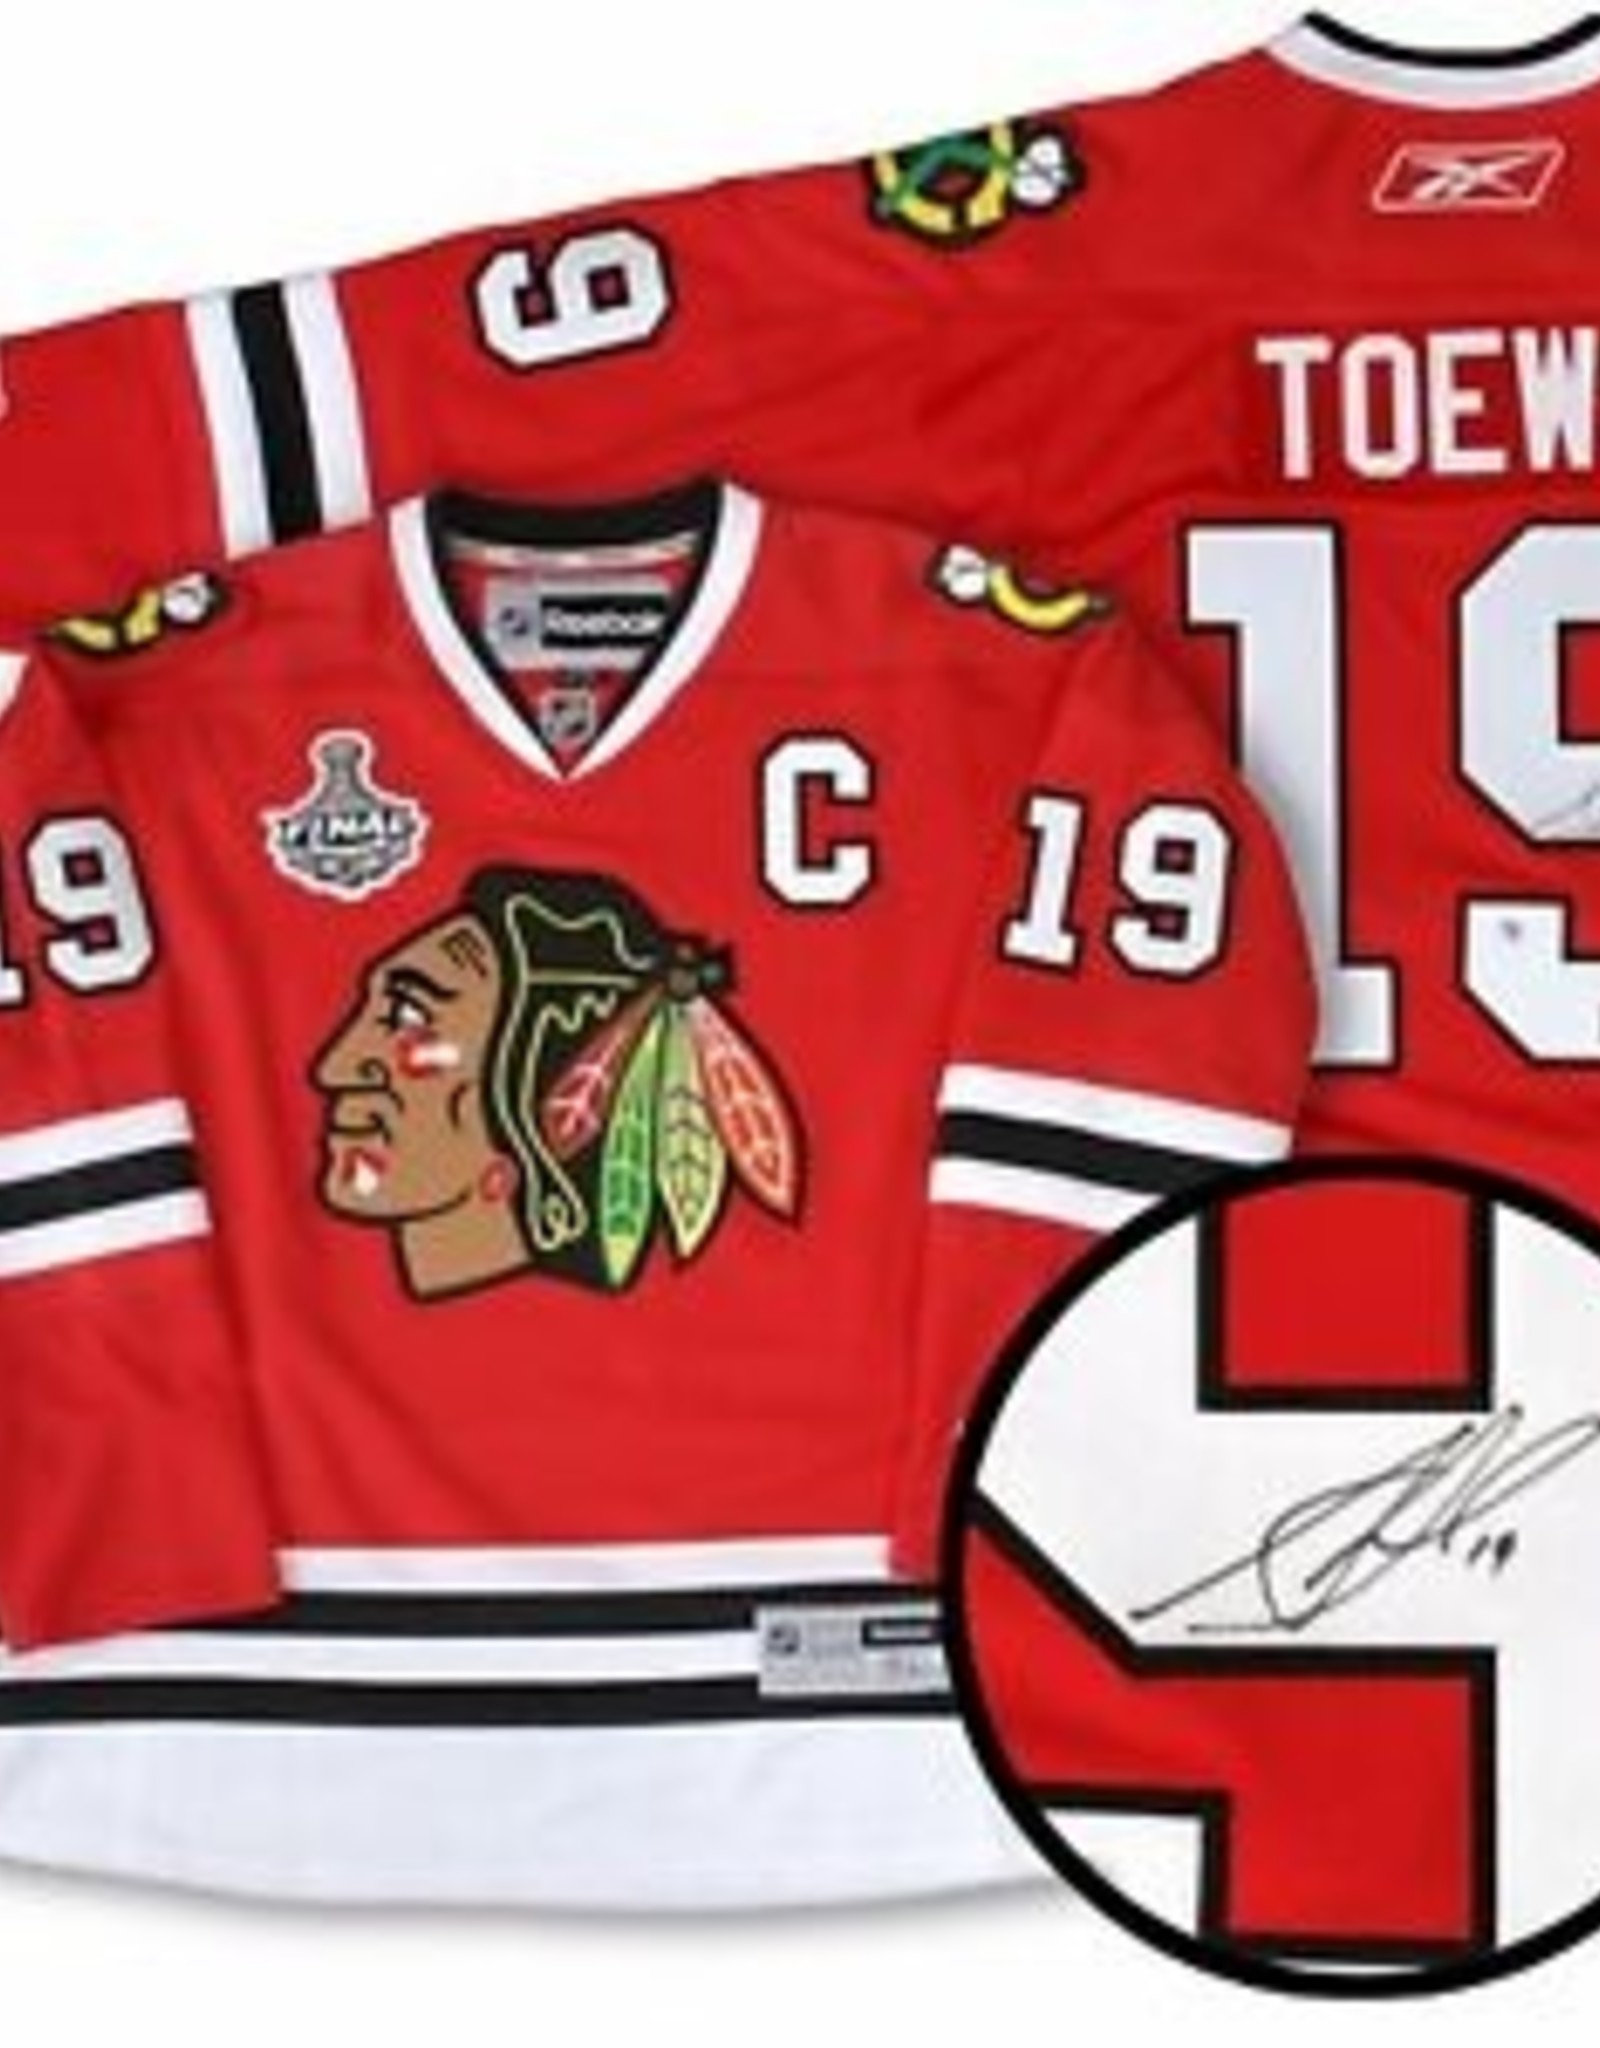 toews jersey signed